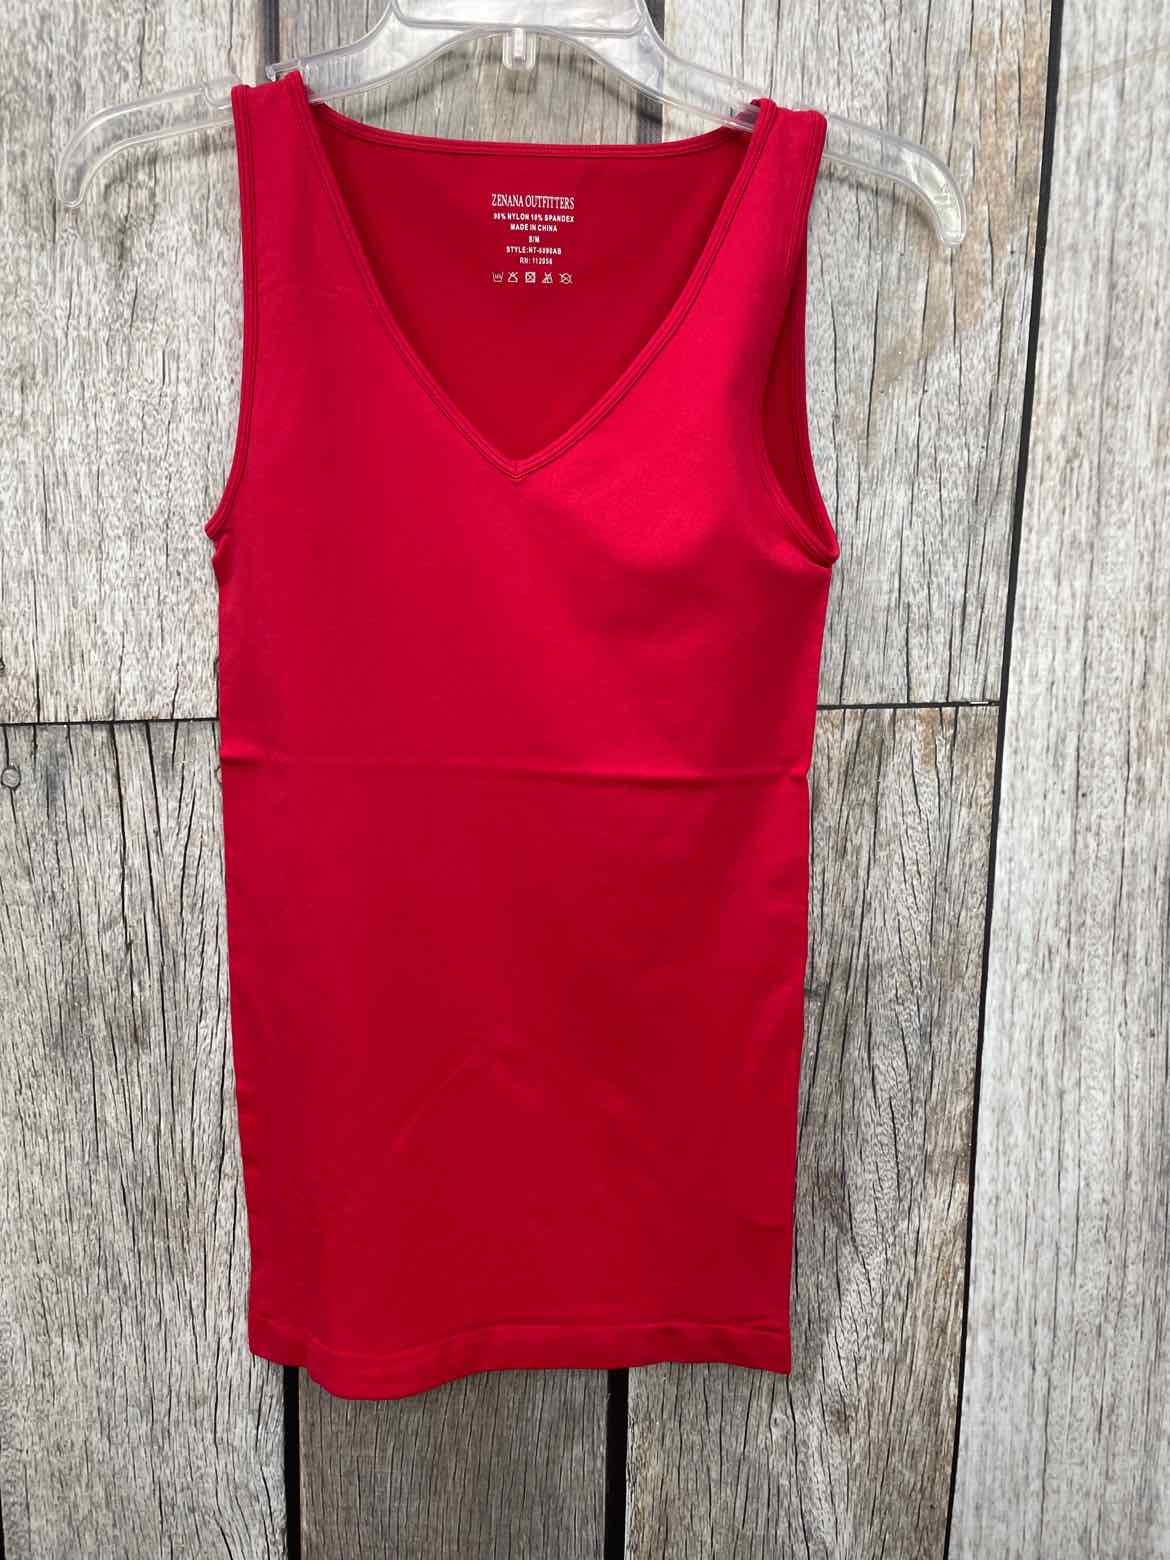 Zenana Outfitters Size S/M Tanktop – HouseofConsignmentNY